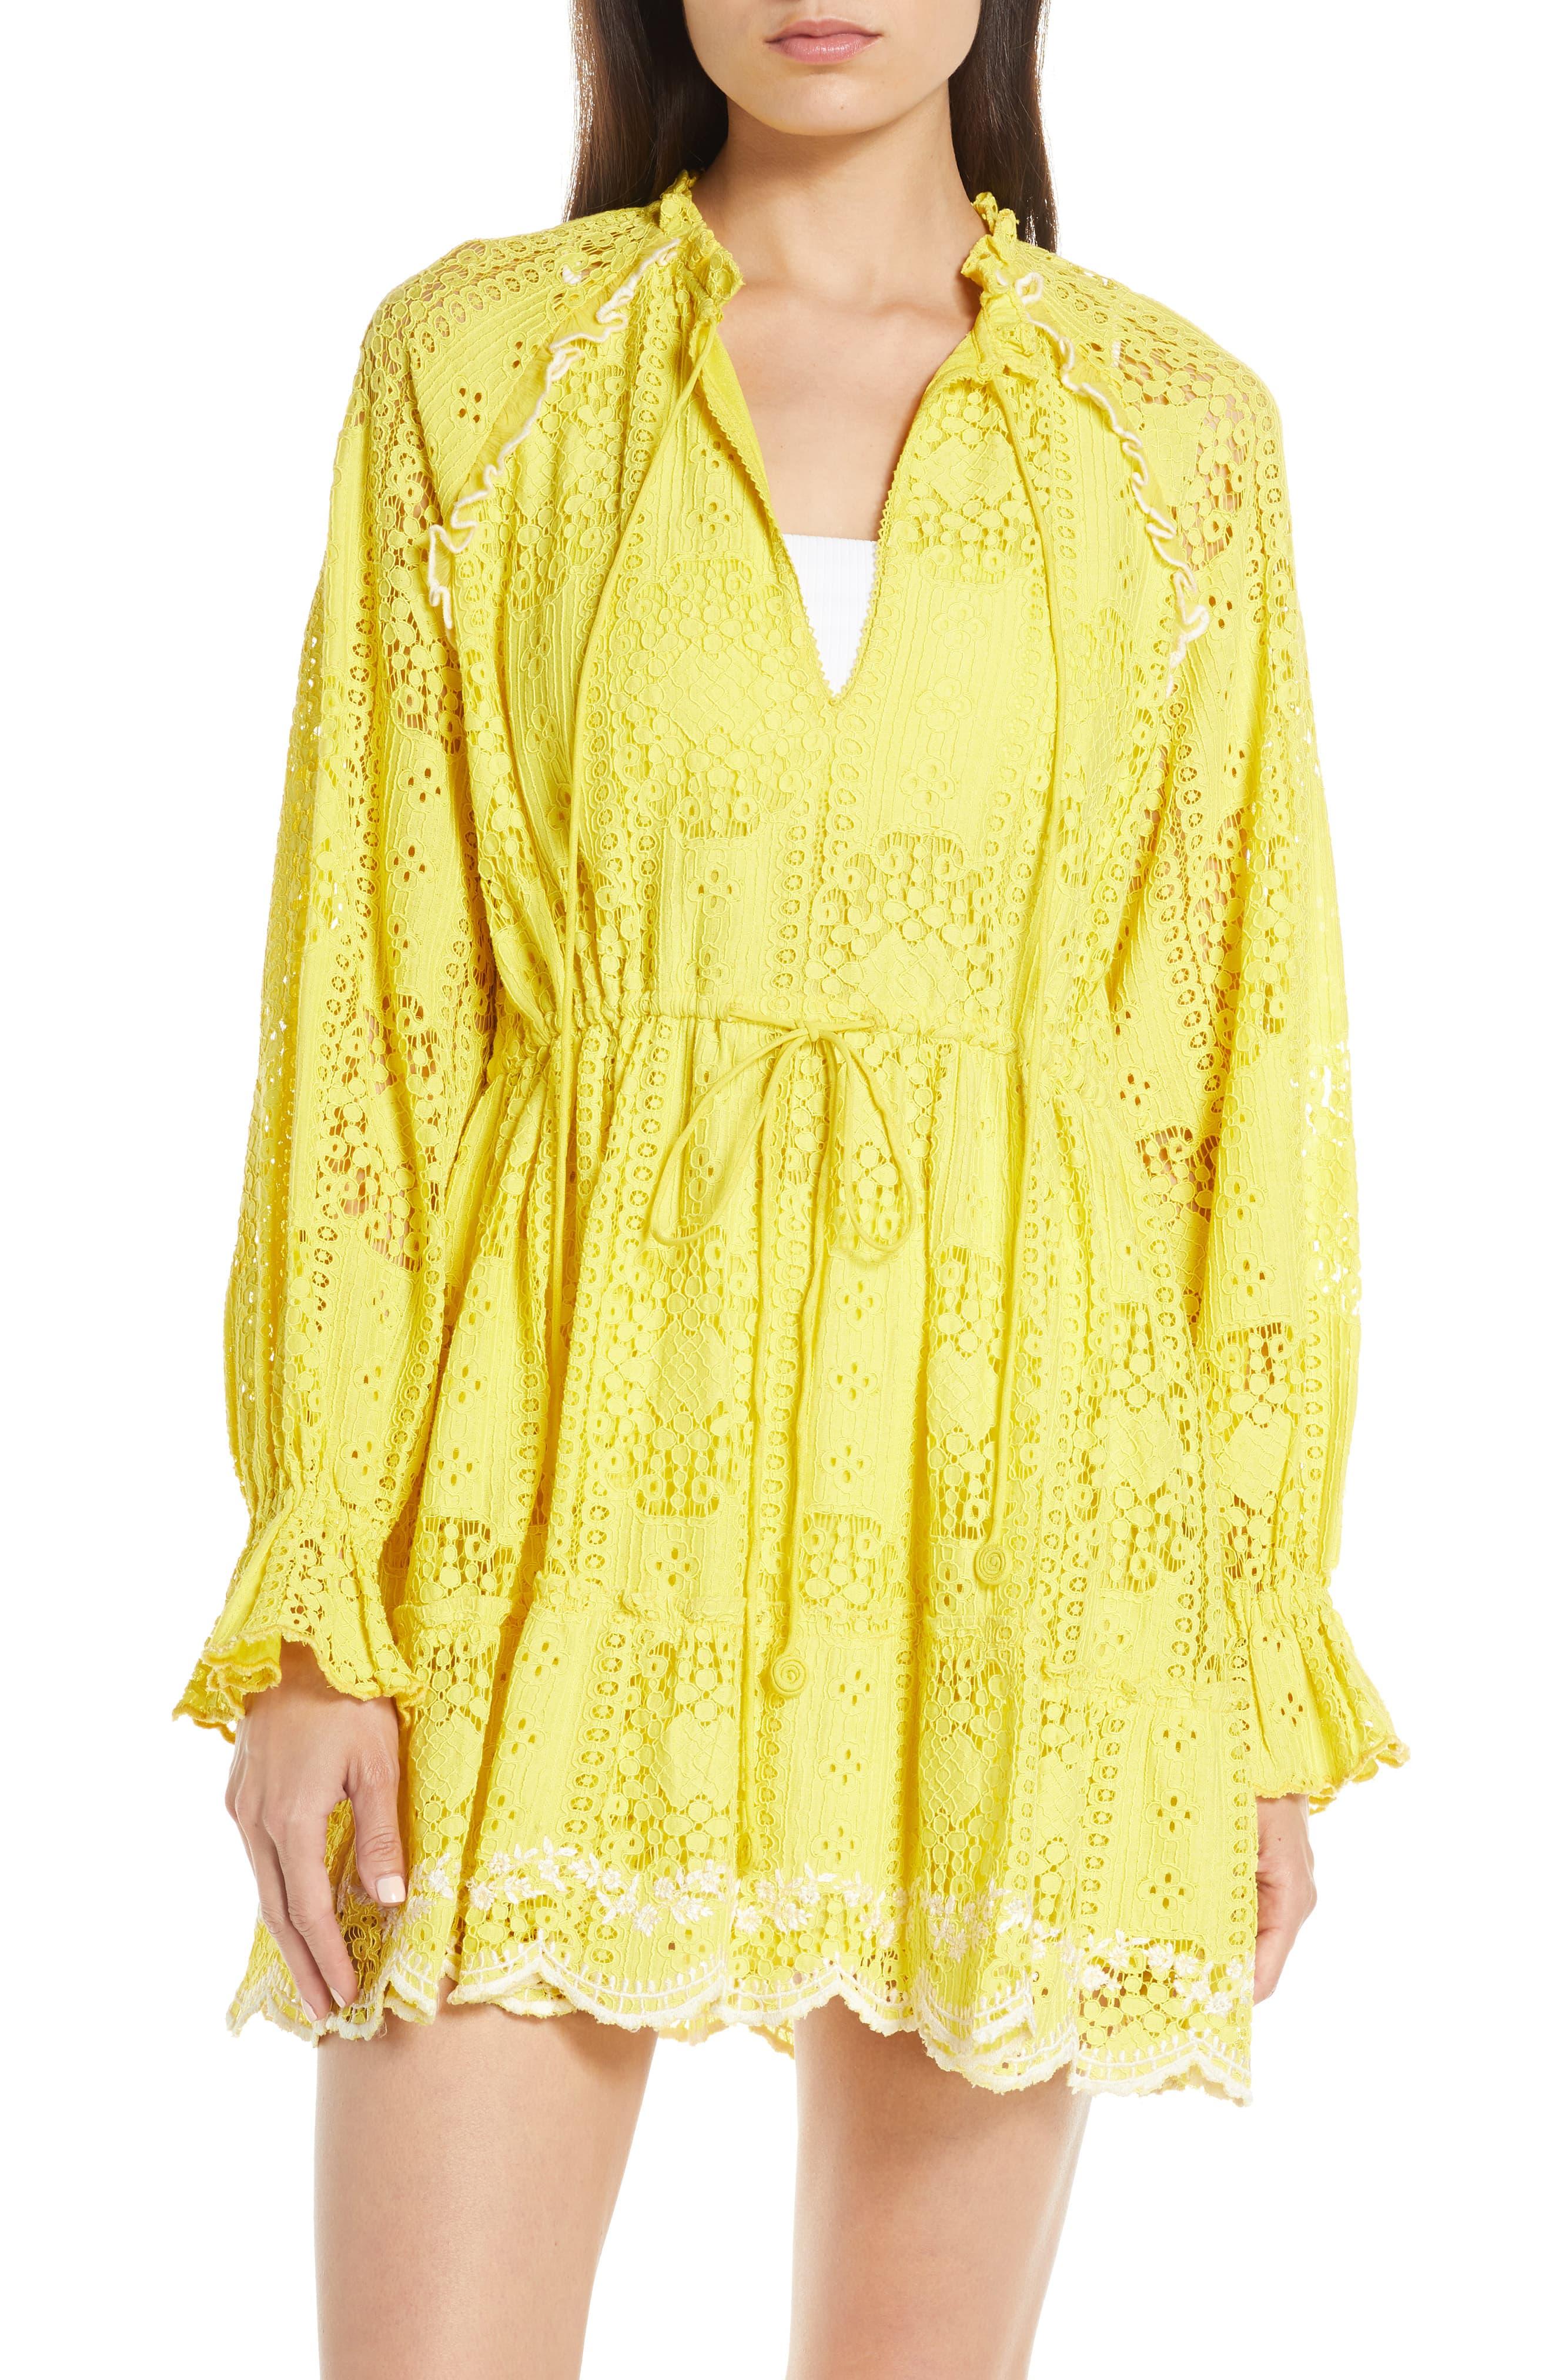 Hemant & Nandita Embroidered Lace Cover-up Dress in Yellow - Lyst